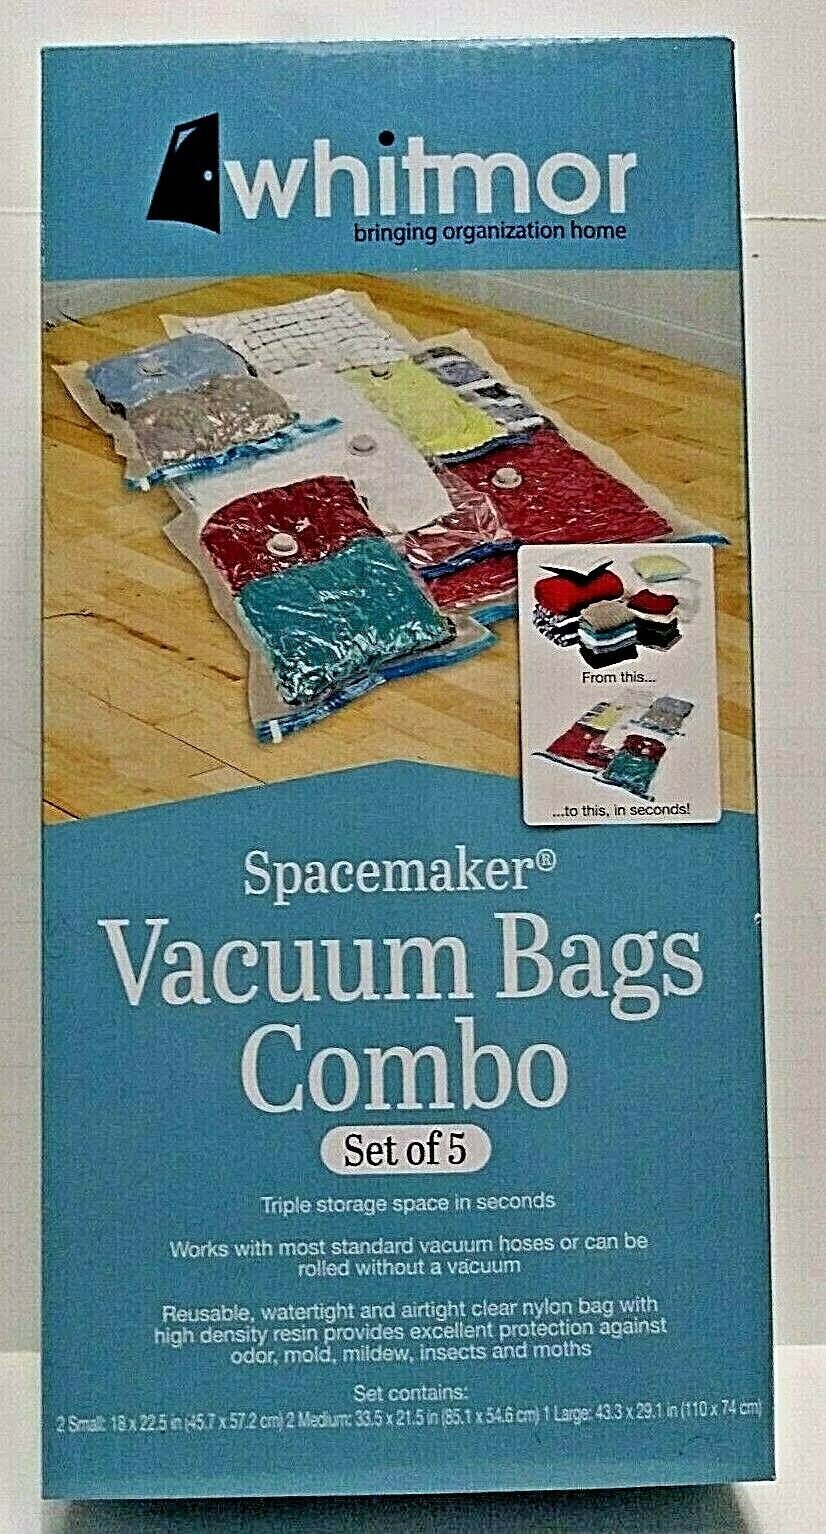 New Whitmor Spacemaker Vacuum Bags Combo Set of 5 Bags 1 Lg, 2 Med, 2 Sm - $7.69